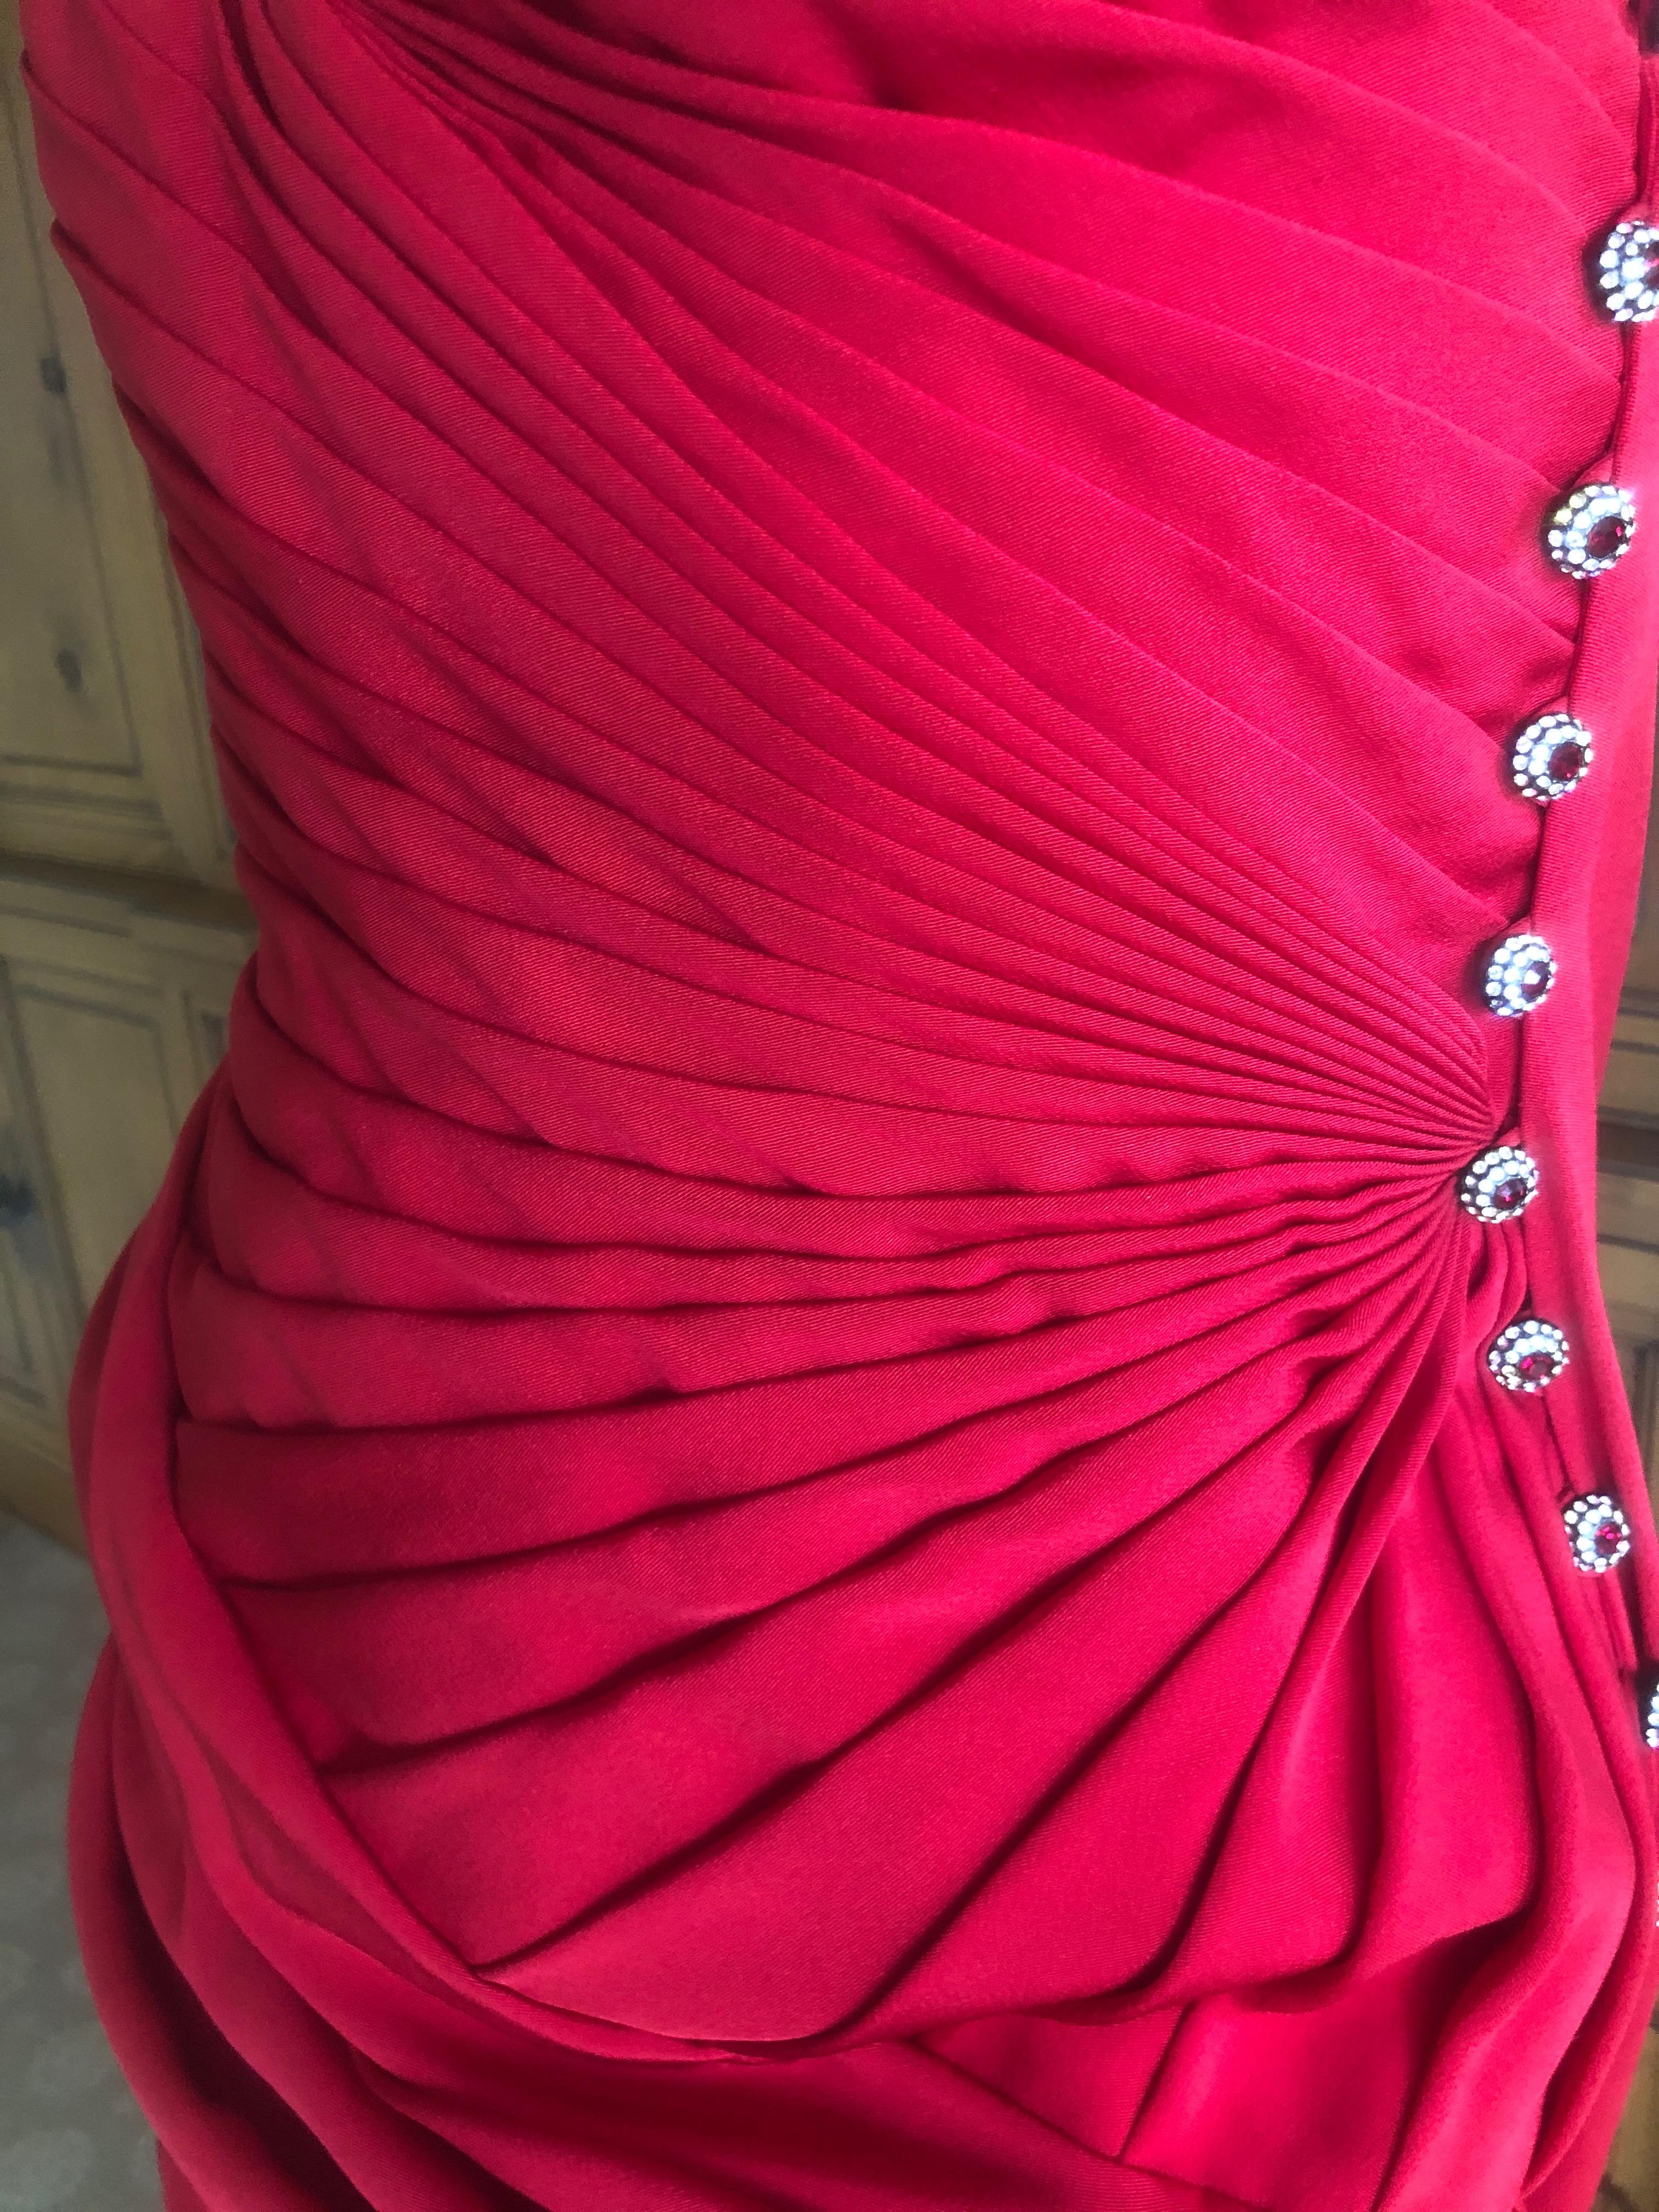 Emanuel Ungaro Numbered Haute Couture Fall 1984 Red  Strapless Evening Dress For Sale 3